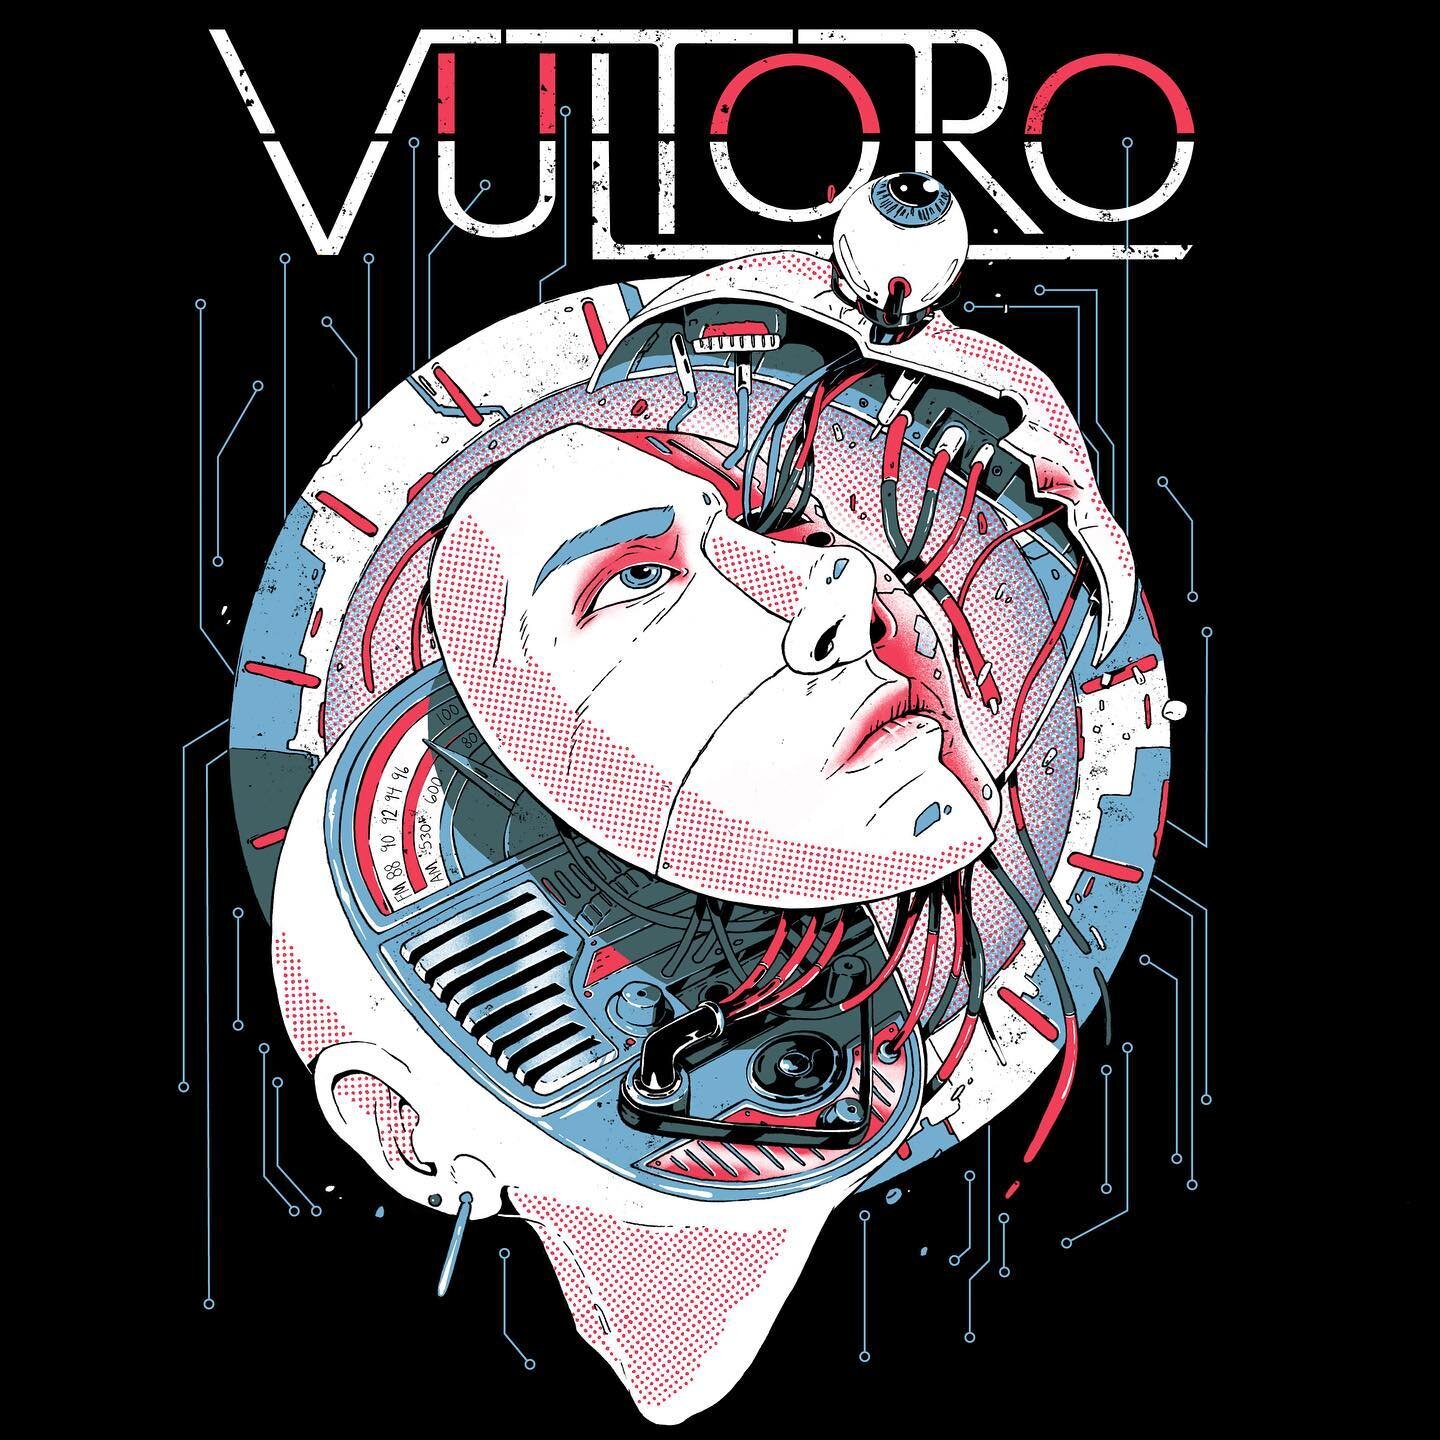 Got the opportunity to do a t-shirt design for Vultoro, an up and coming band from my hometown in New Jersey! ✨
.
I feel so grateful for this commission as I really got to experiment with concept and execution. It brought me back to high school when 